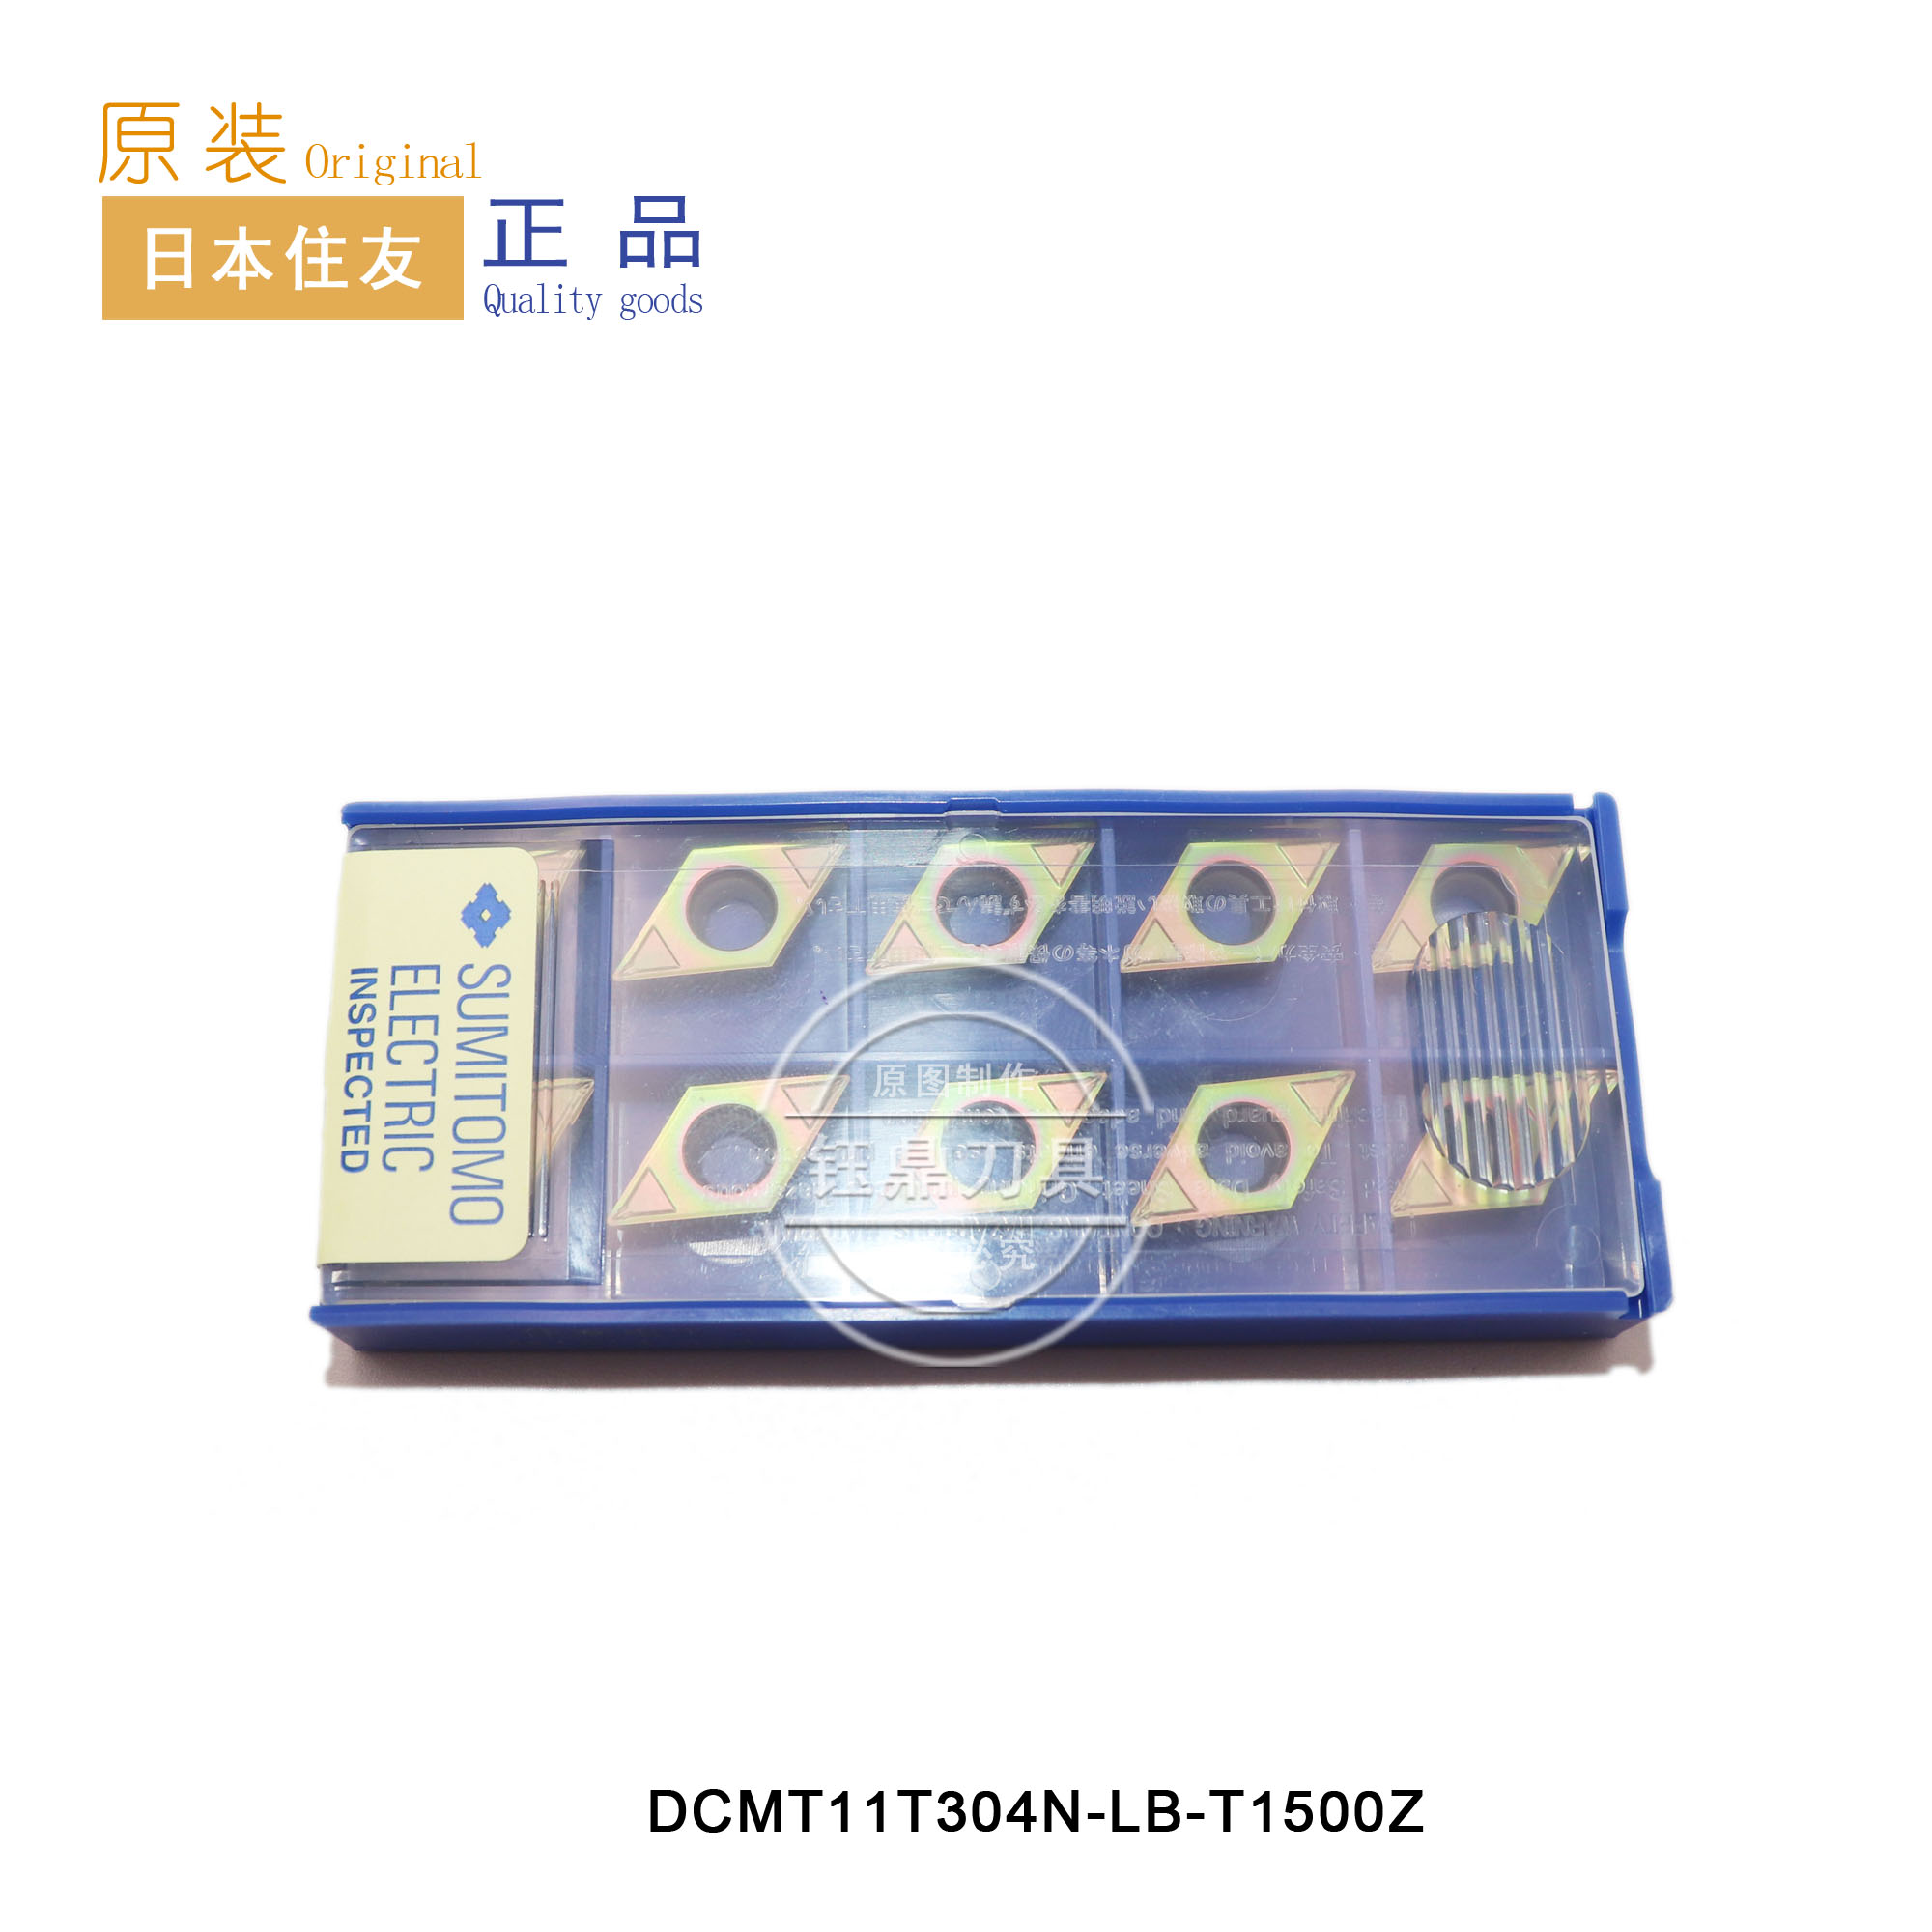 Cermet indexable turning insert tablets DCMT11T304Cermet indexable turning insert tablets DCMT11T304